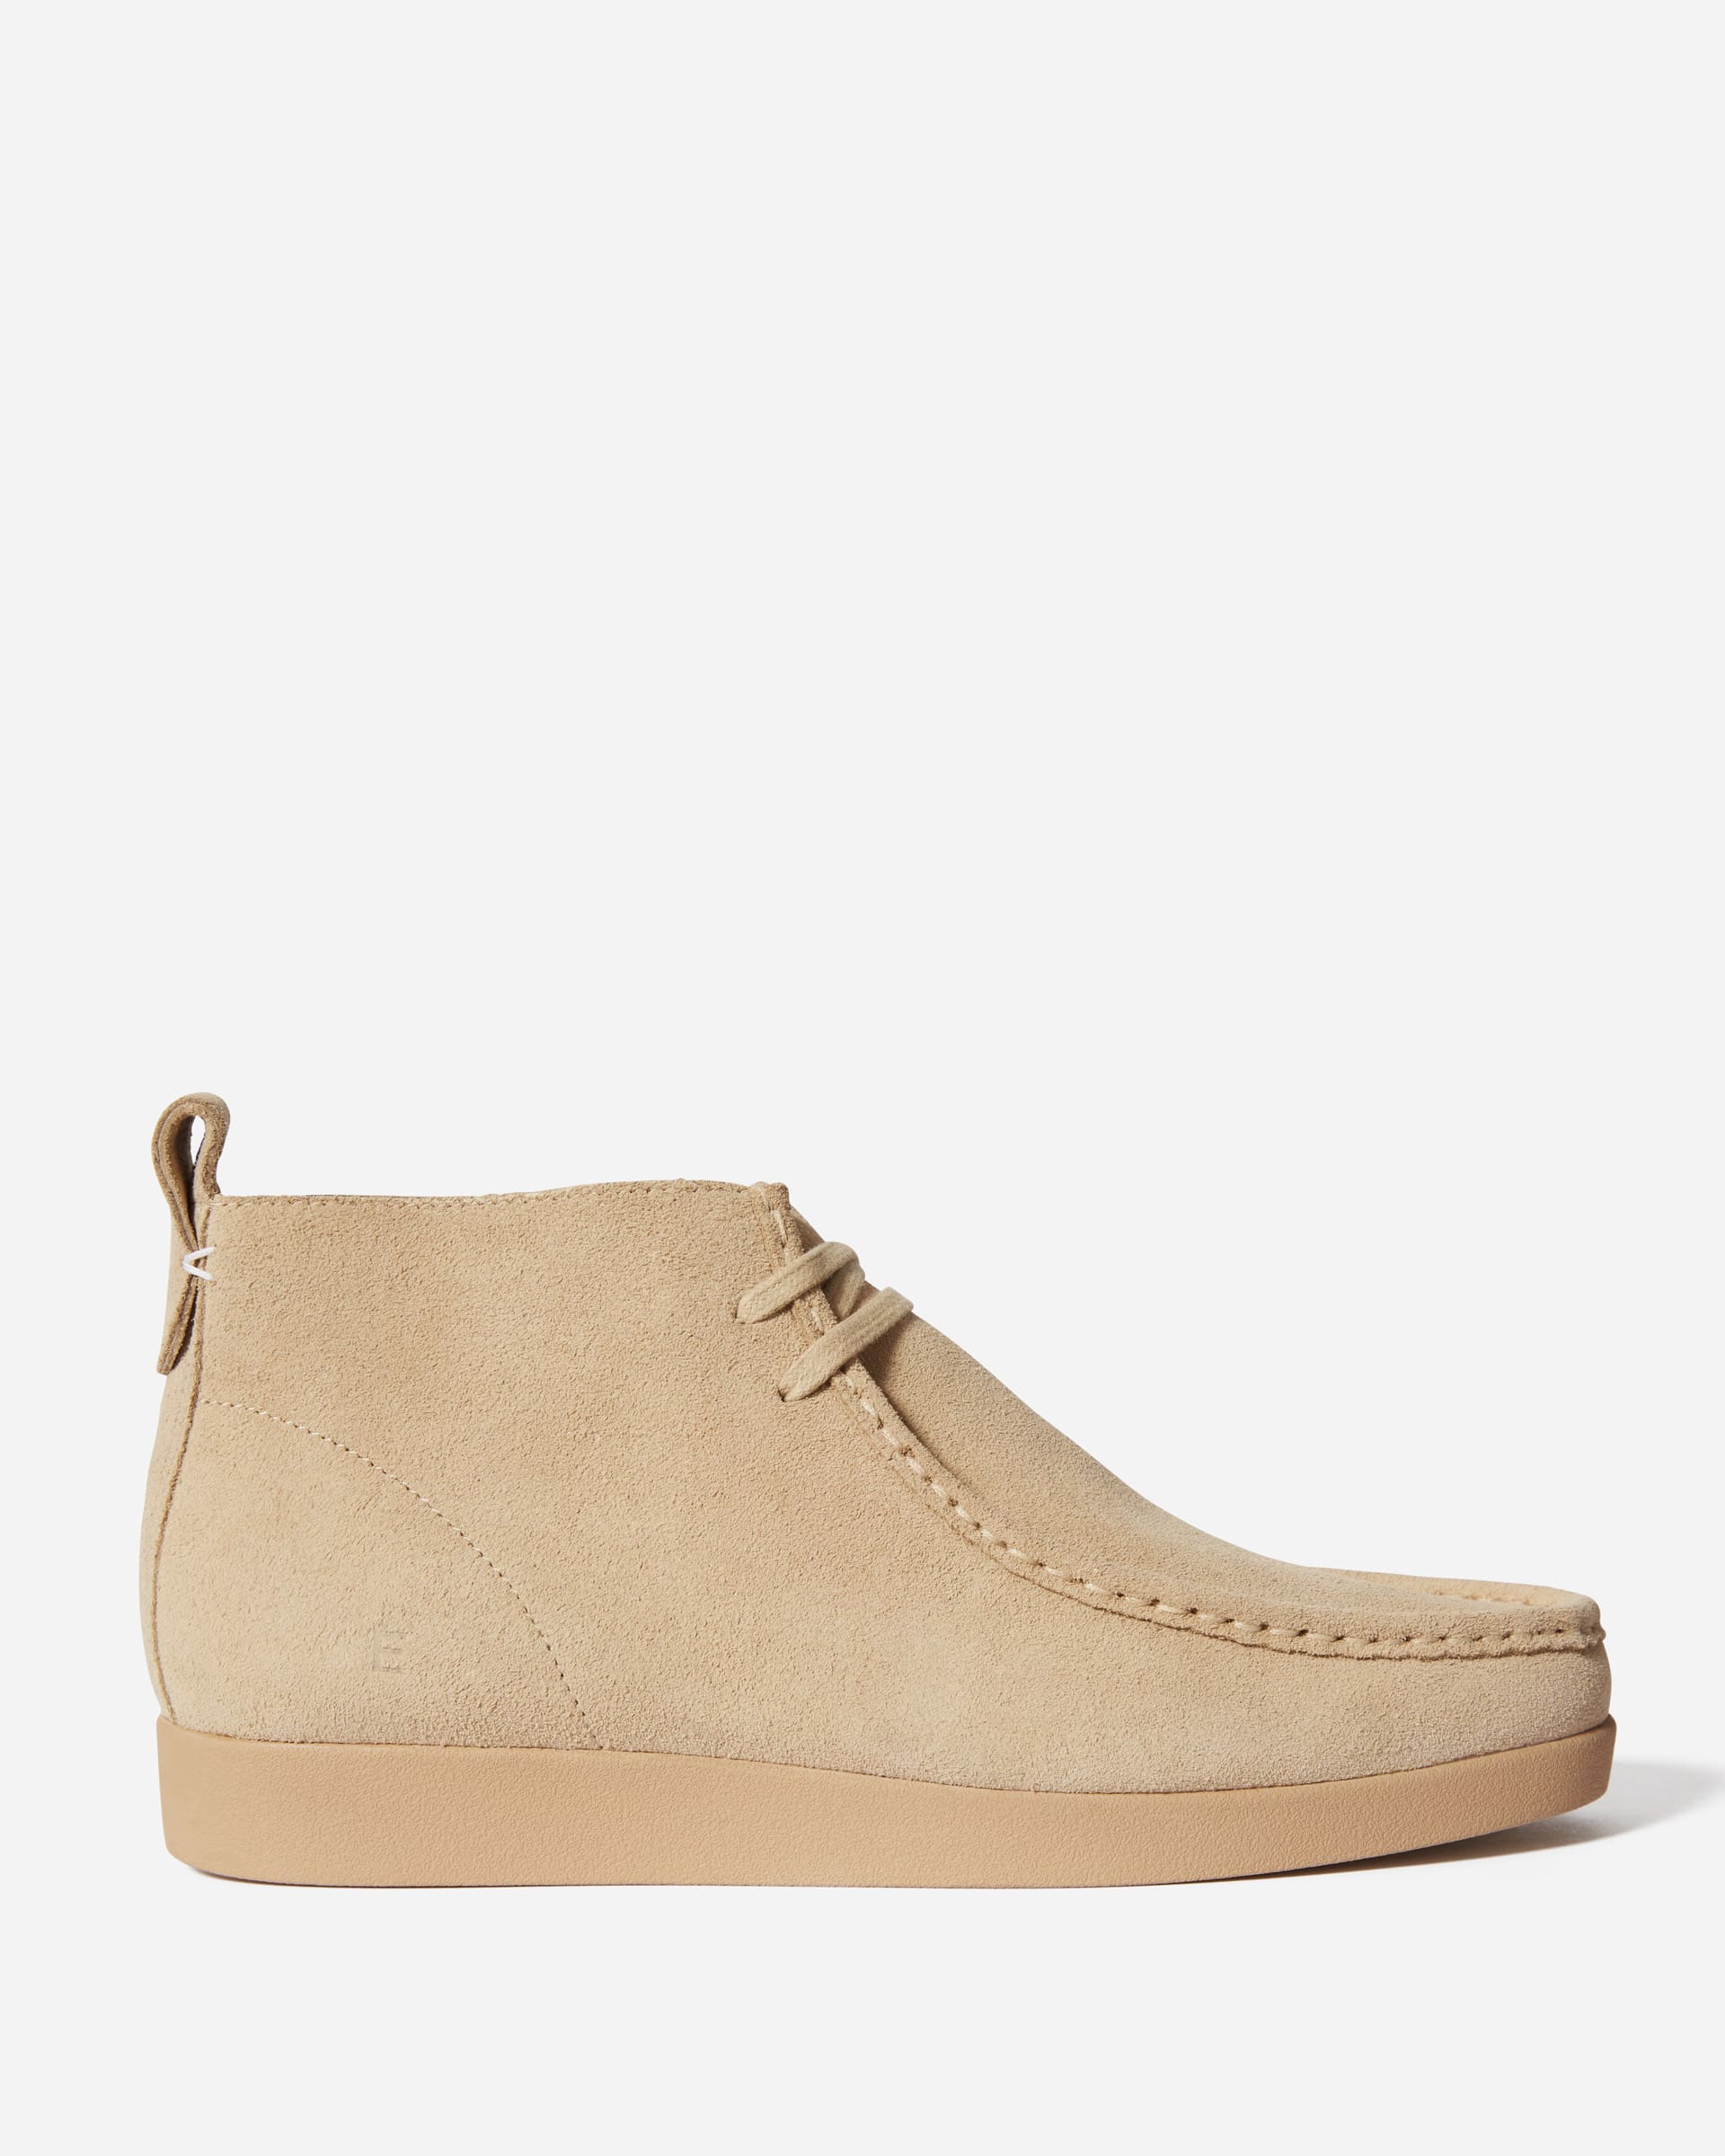 The Moc-Toe Boot Pebble Suede – Everlane